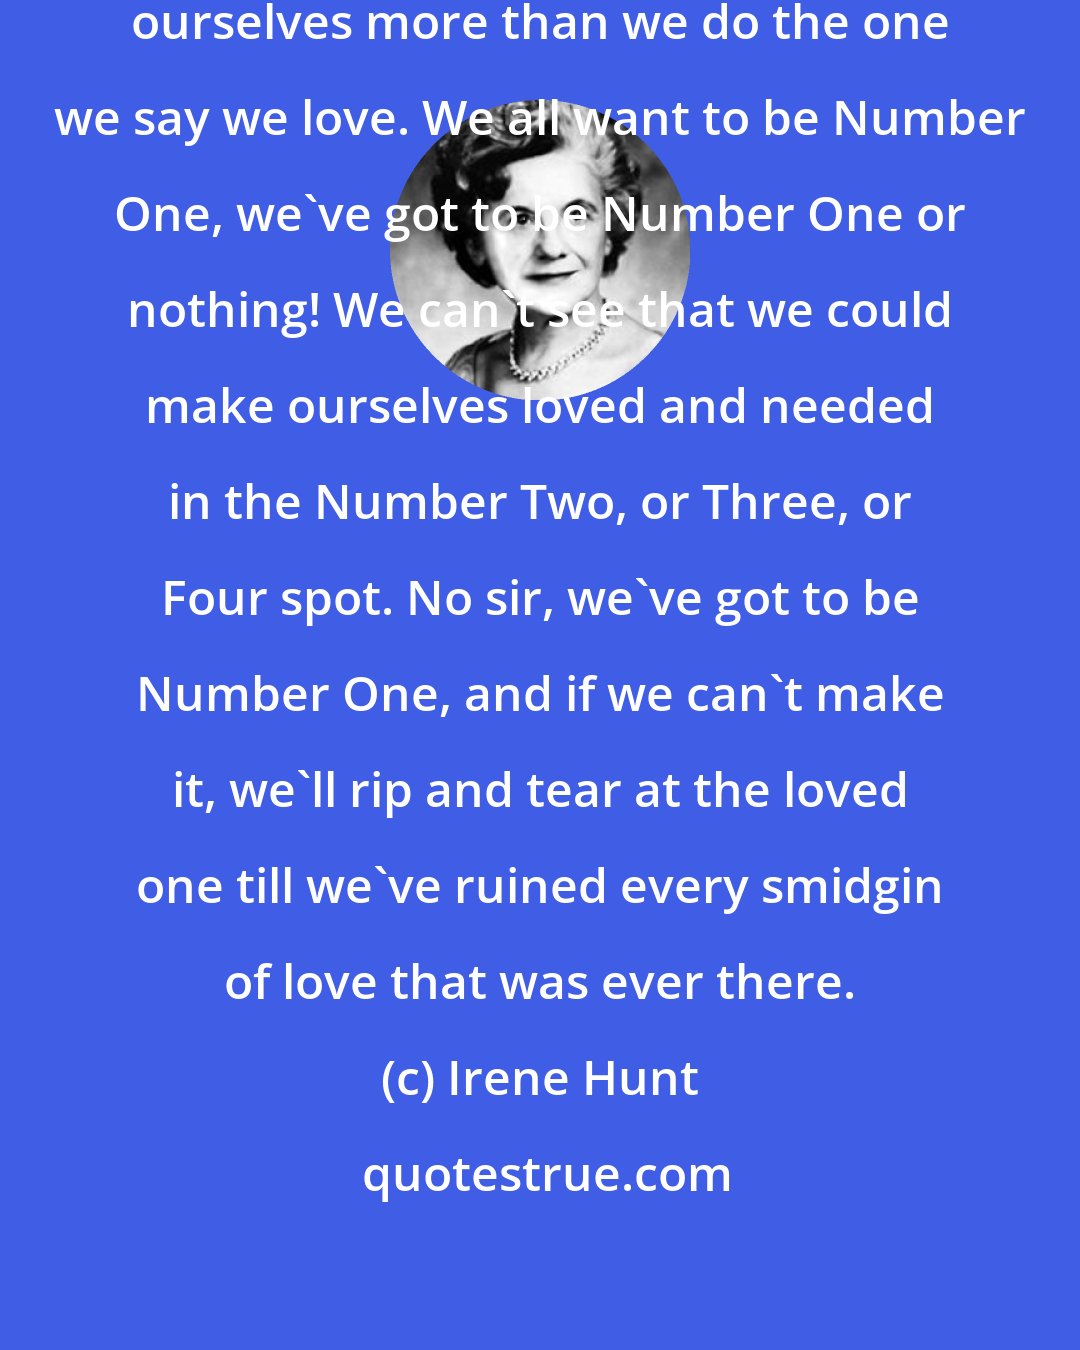 Irene Hunt: It happens the world over - we love ourselves more than we do the one we say we love. We all want to be Number One, we've got to be Number One or nothing! We can't see that we could make ourselves loved and needed in the Number Two, or Three, or Four spot. No sir, we've got to be Number One, and if we can't make it, we'll rip and tear at the loved one till we've ruined every smidgin of love that was ever there.